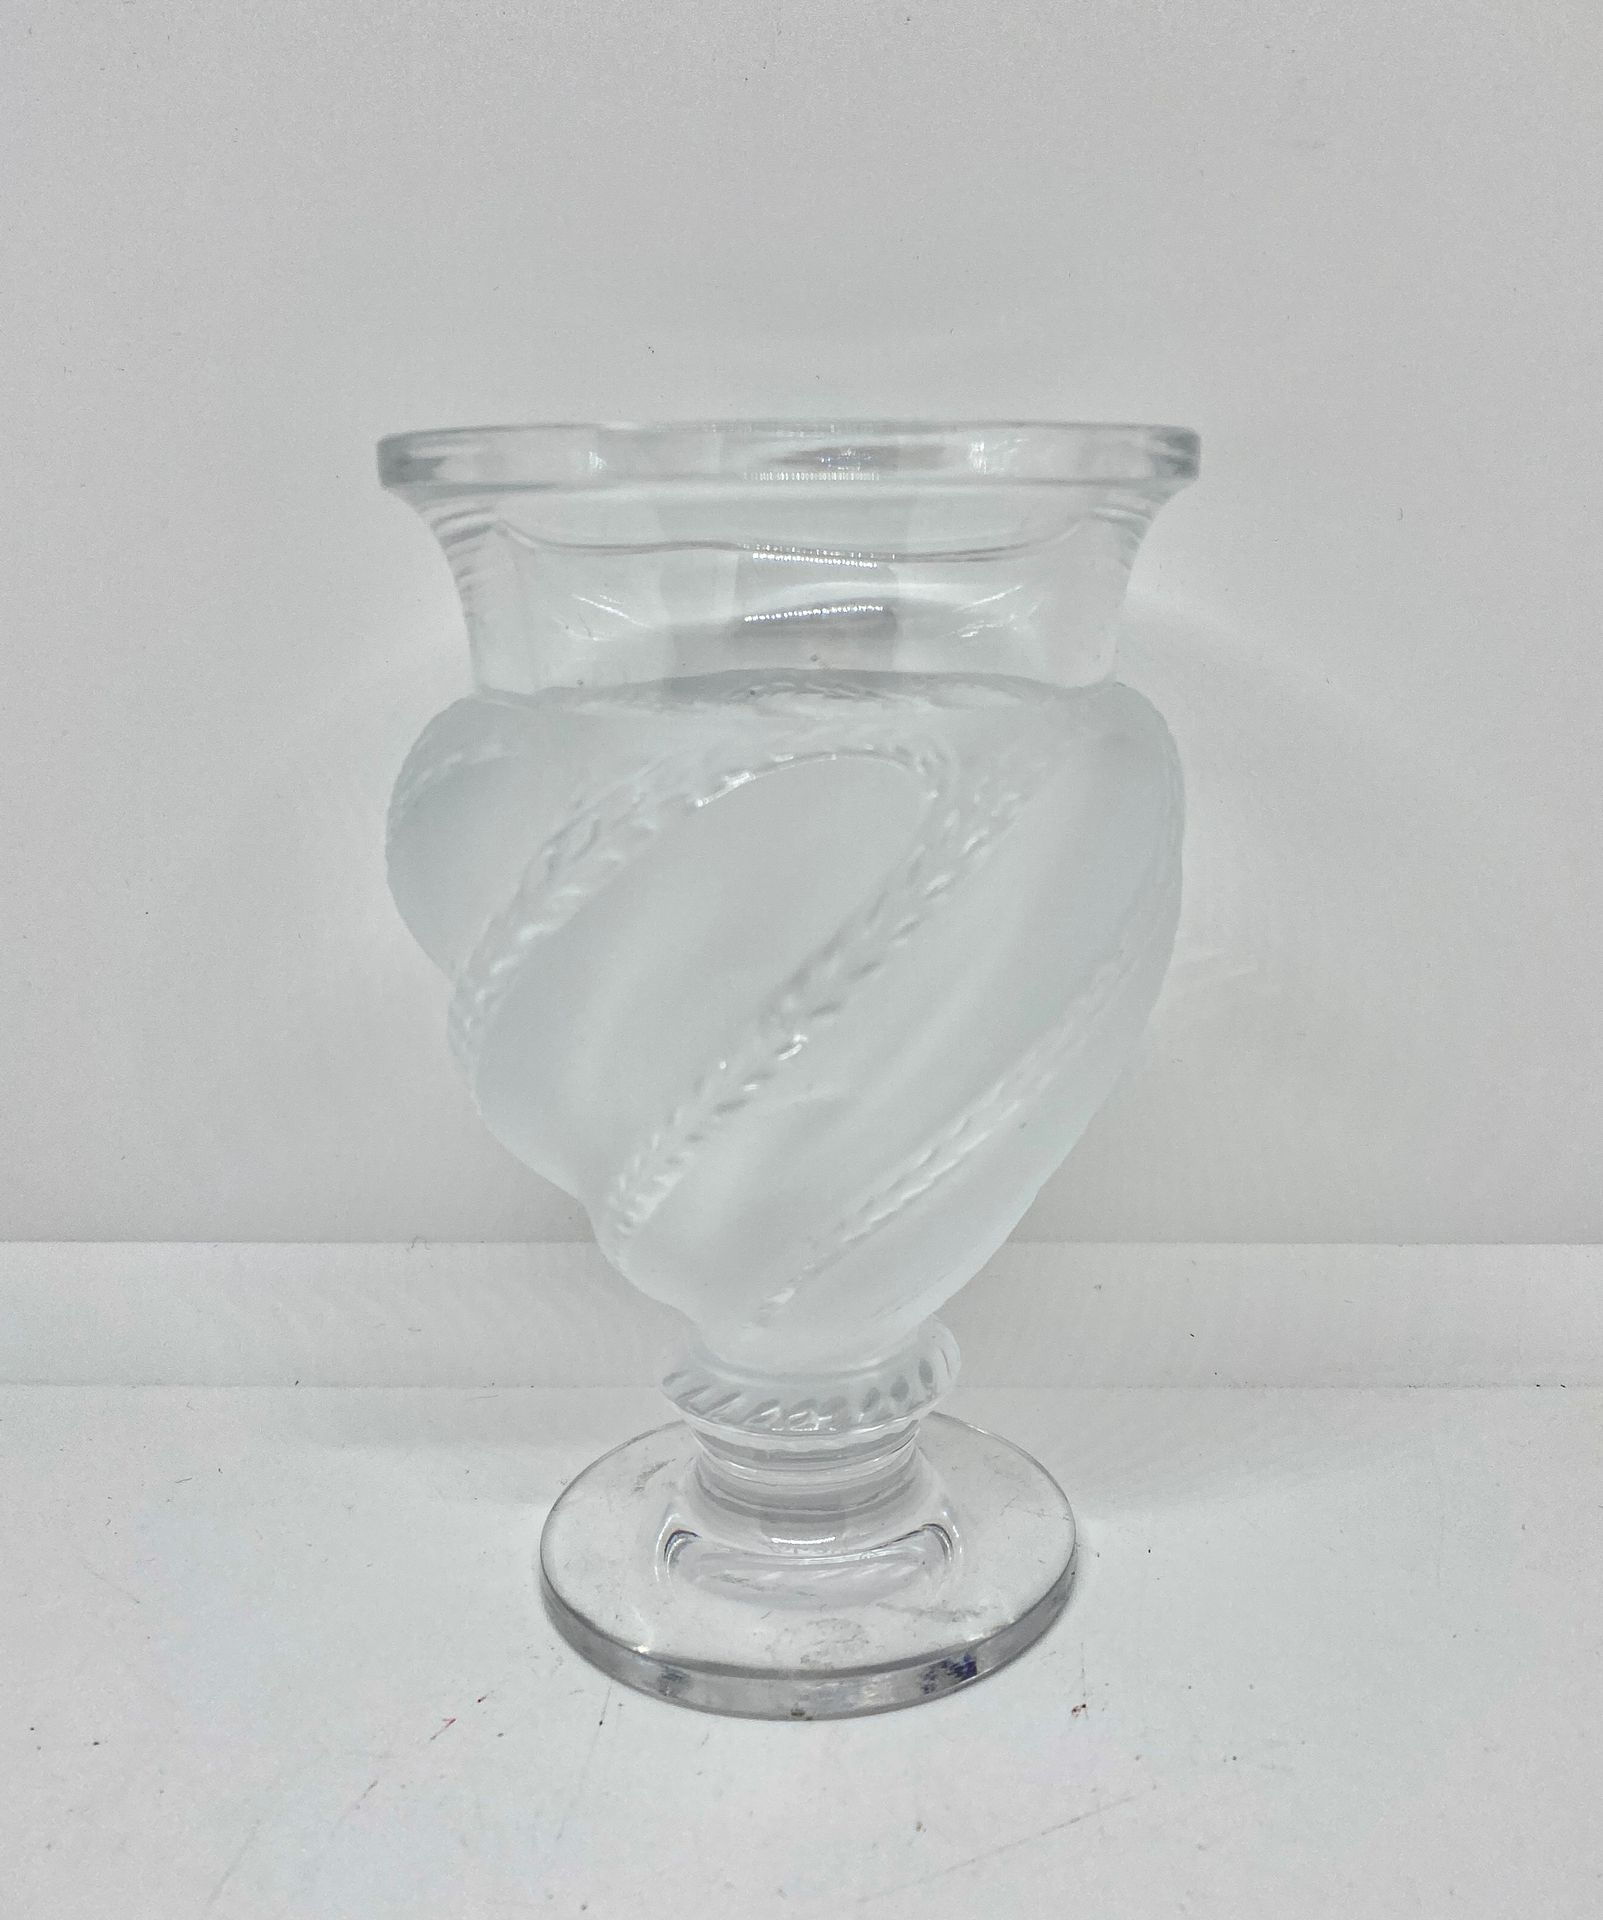 Null LALIQUE France

Cup on foot in crystal